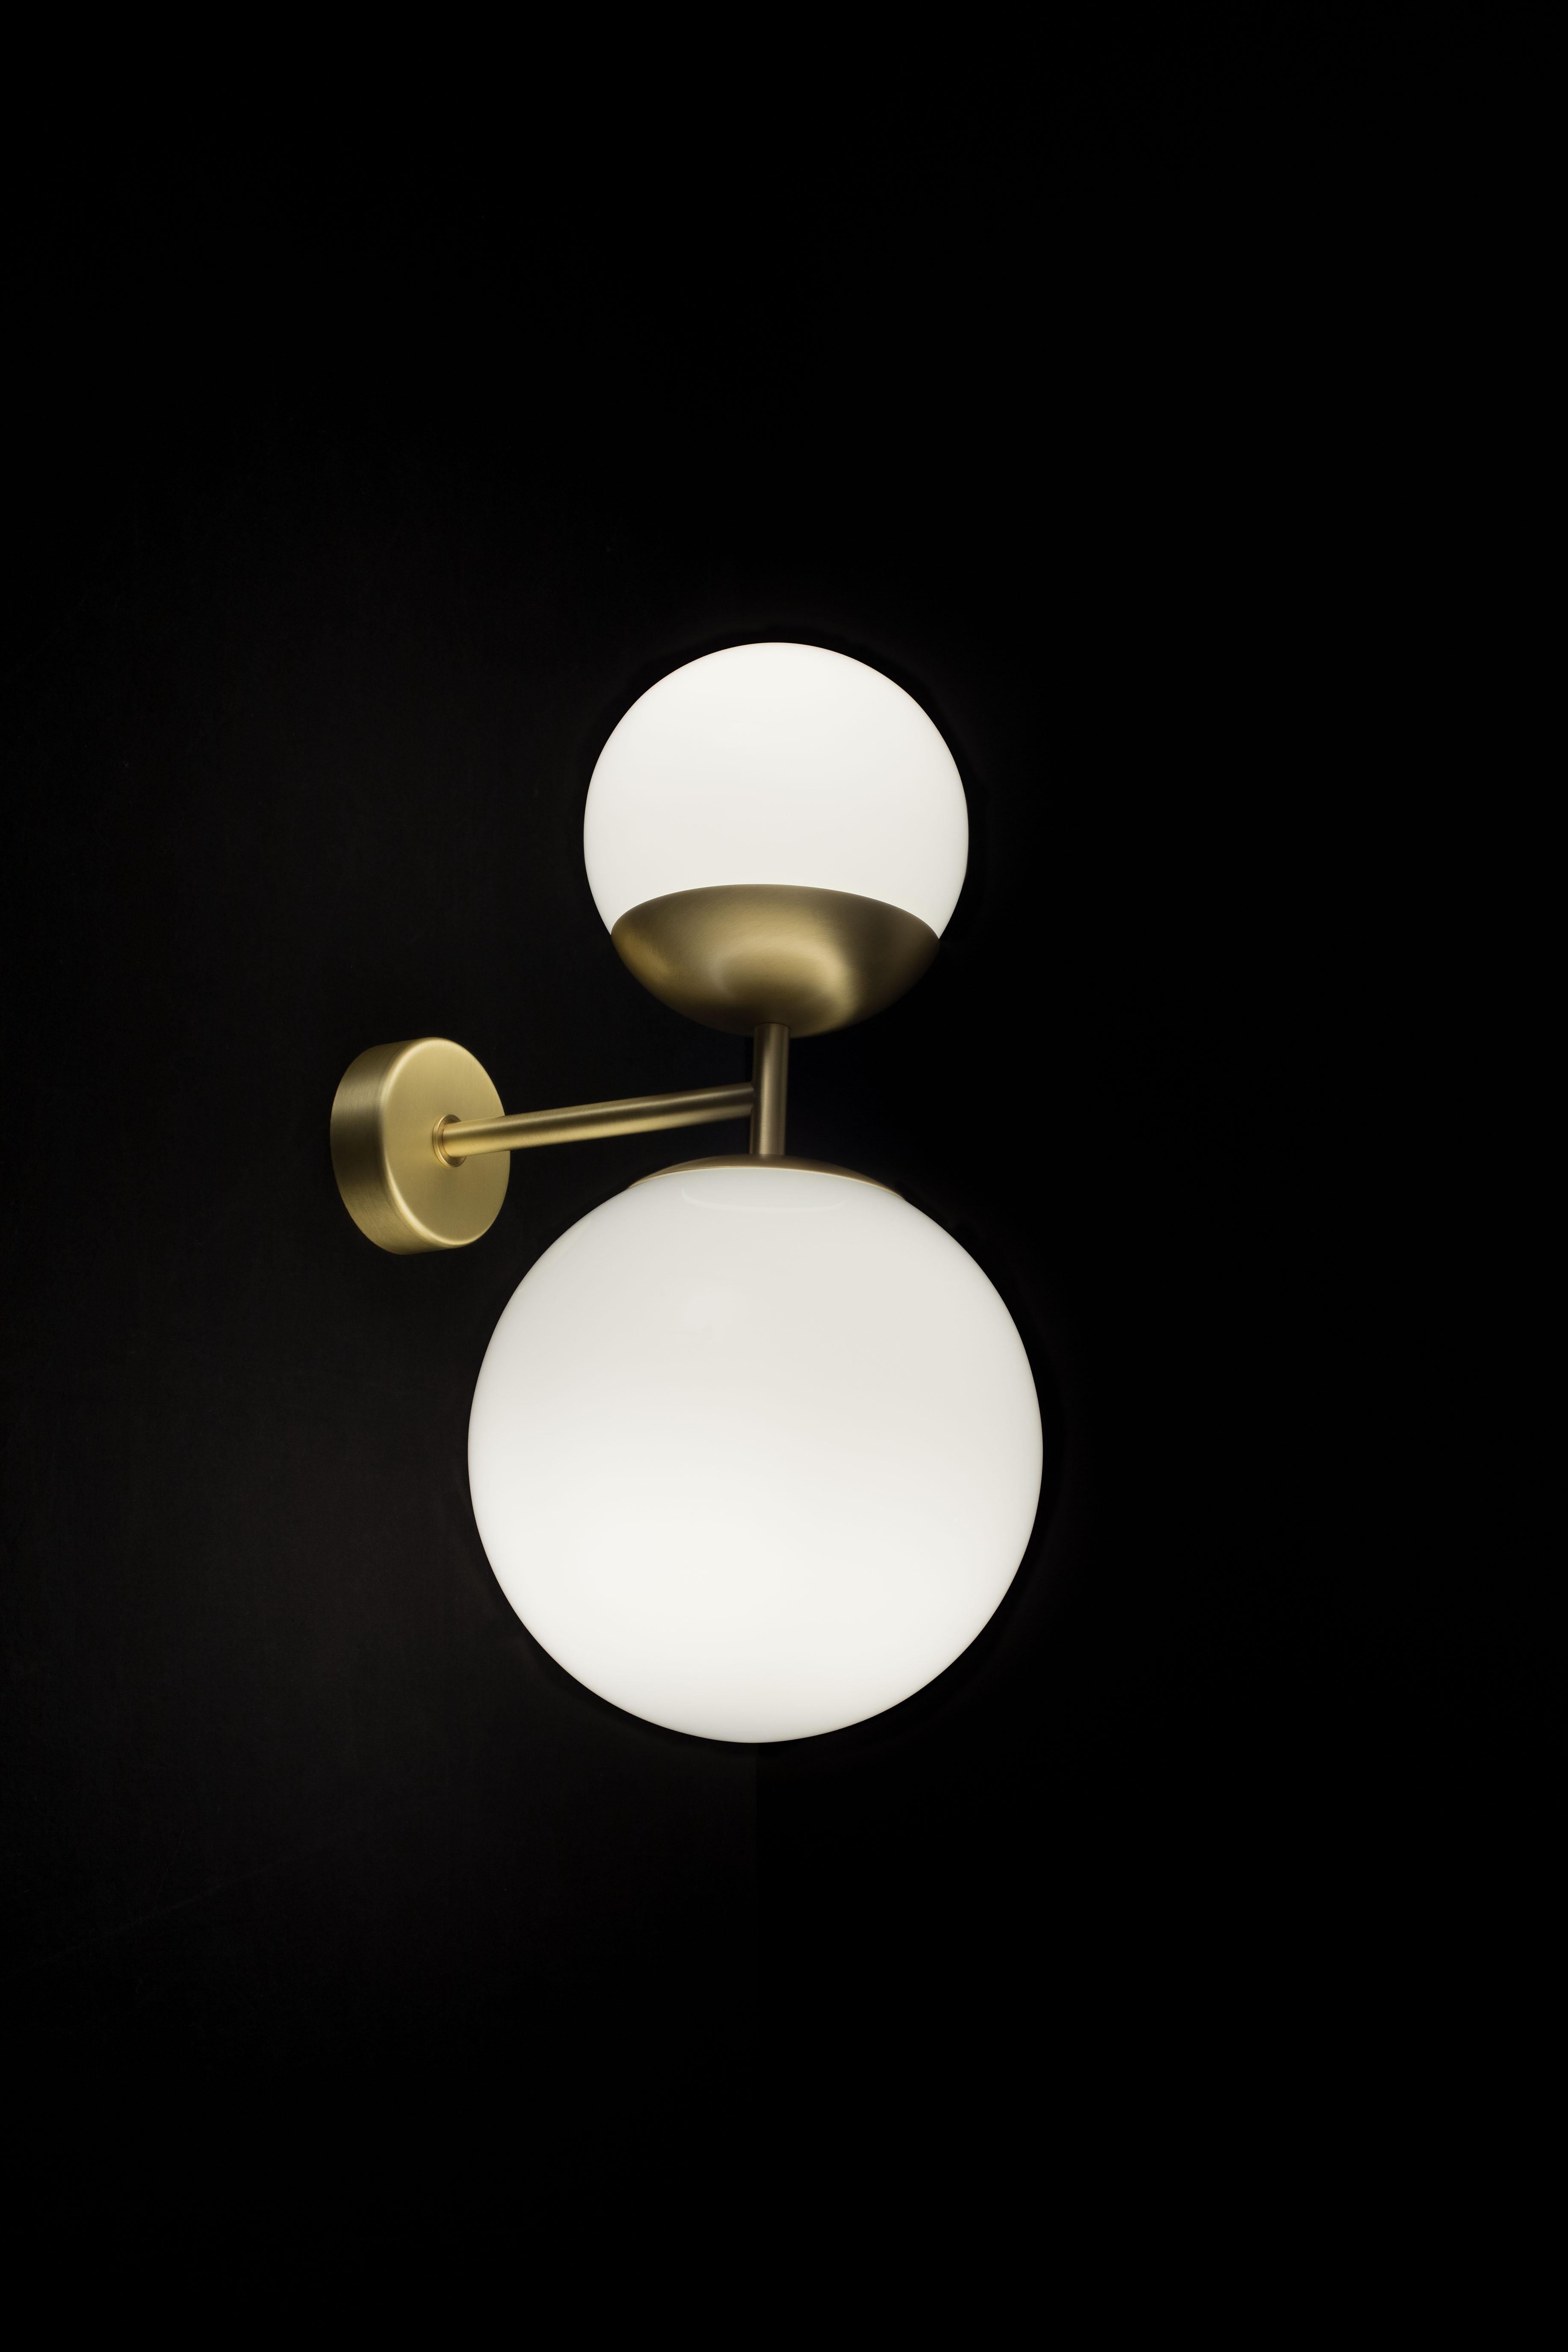 Biba Applique wall lamp in satin brass and white glass for Tato Italia. 

Designed by Lorenza Bozzoli in 2017 this lamp is executed in a brushed brass combined with white glass using the finest materials available and to the exacting standards of